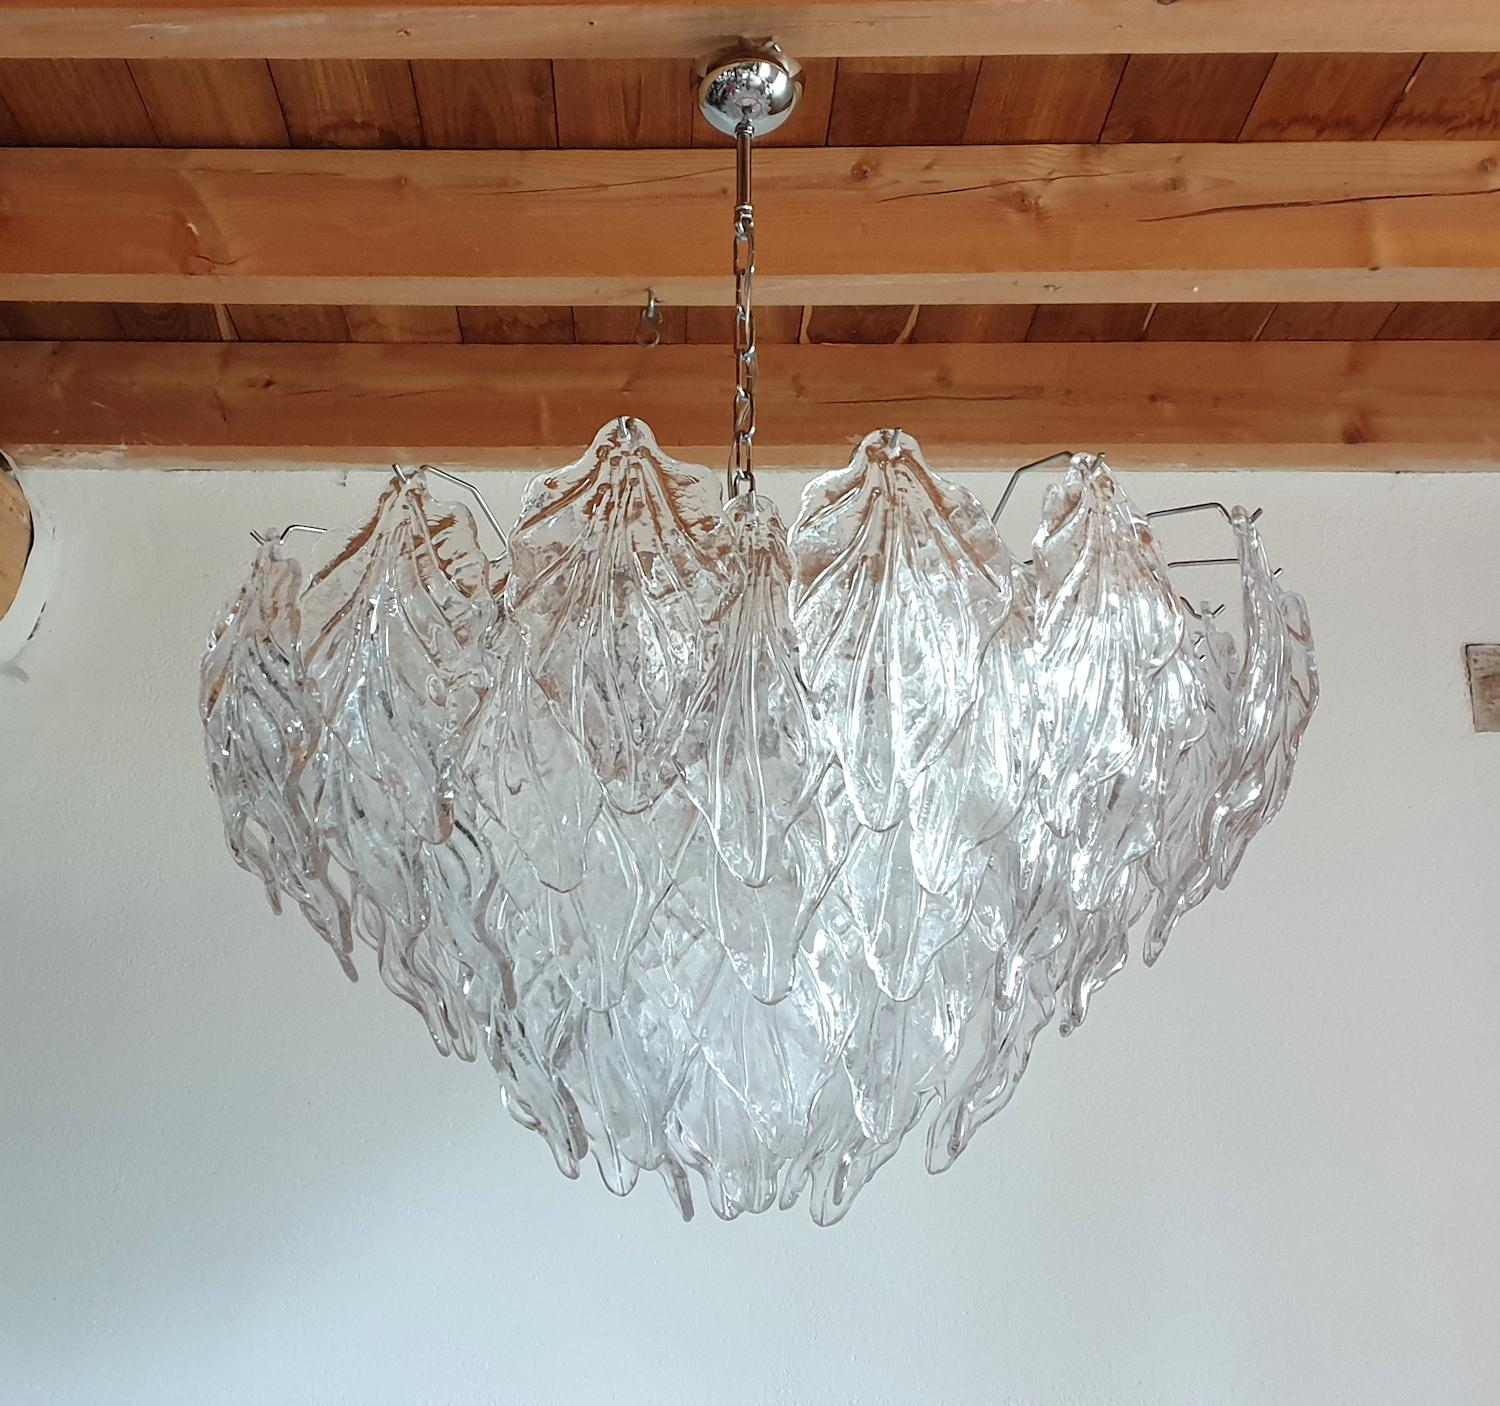 Mid-Century Modern Murano glass chandelier or flush mount ceiling light.
Attributed to Barovier e Toso, Italy, 1970s.
Made of handmade clear Murano glass leaves, and chrome mounts.
The chandelier has a chain and canopy: H 27.55 in., but can be